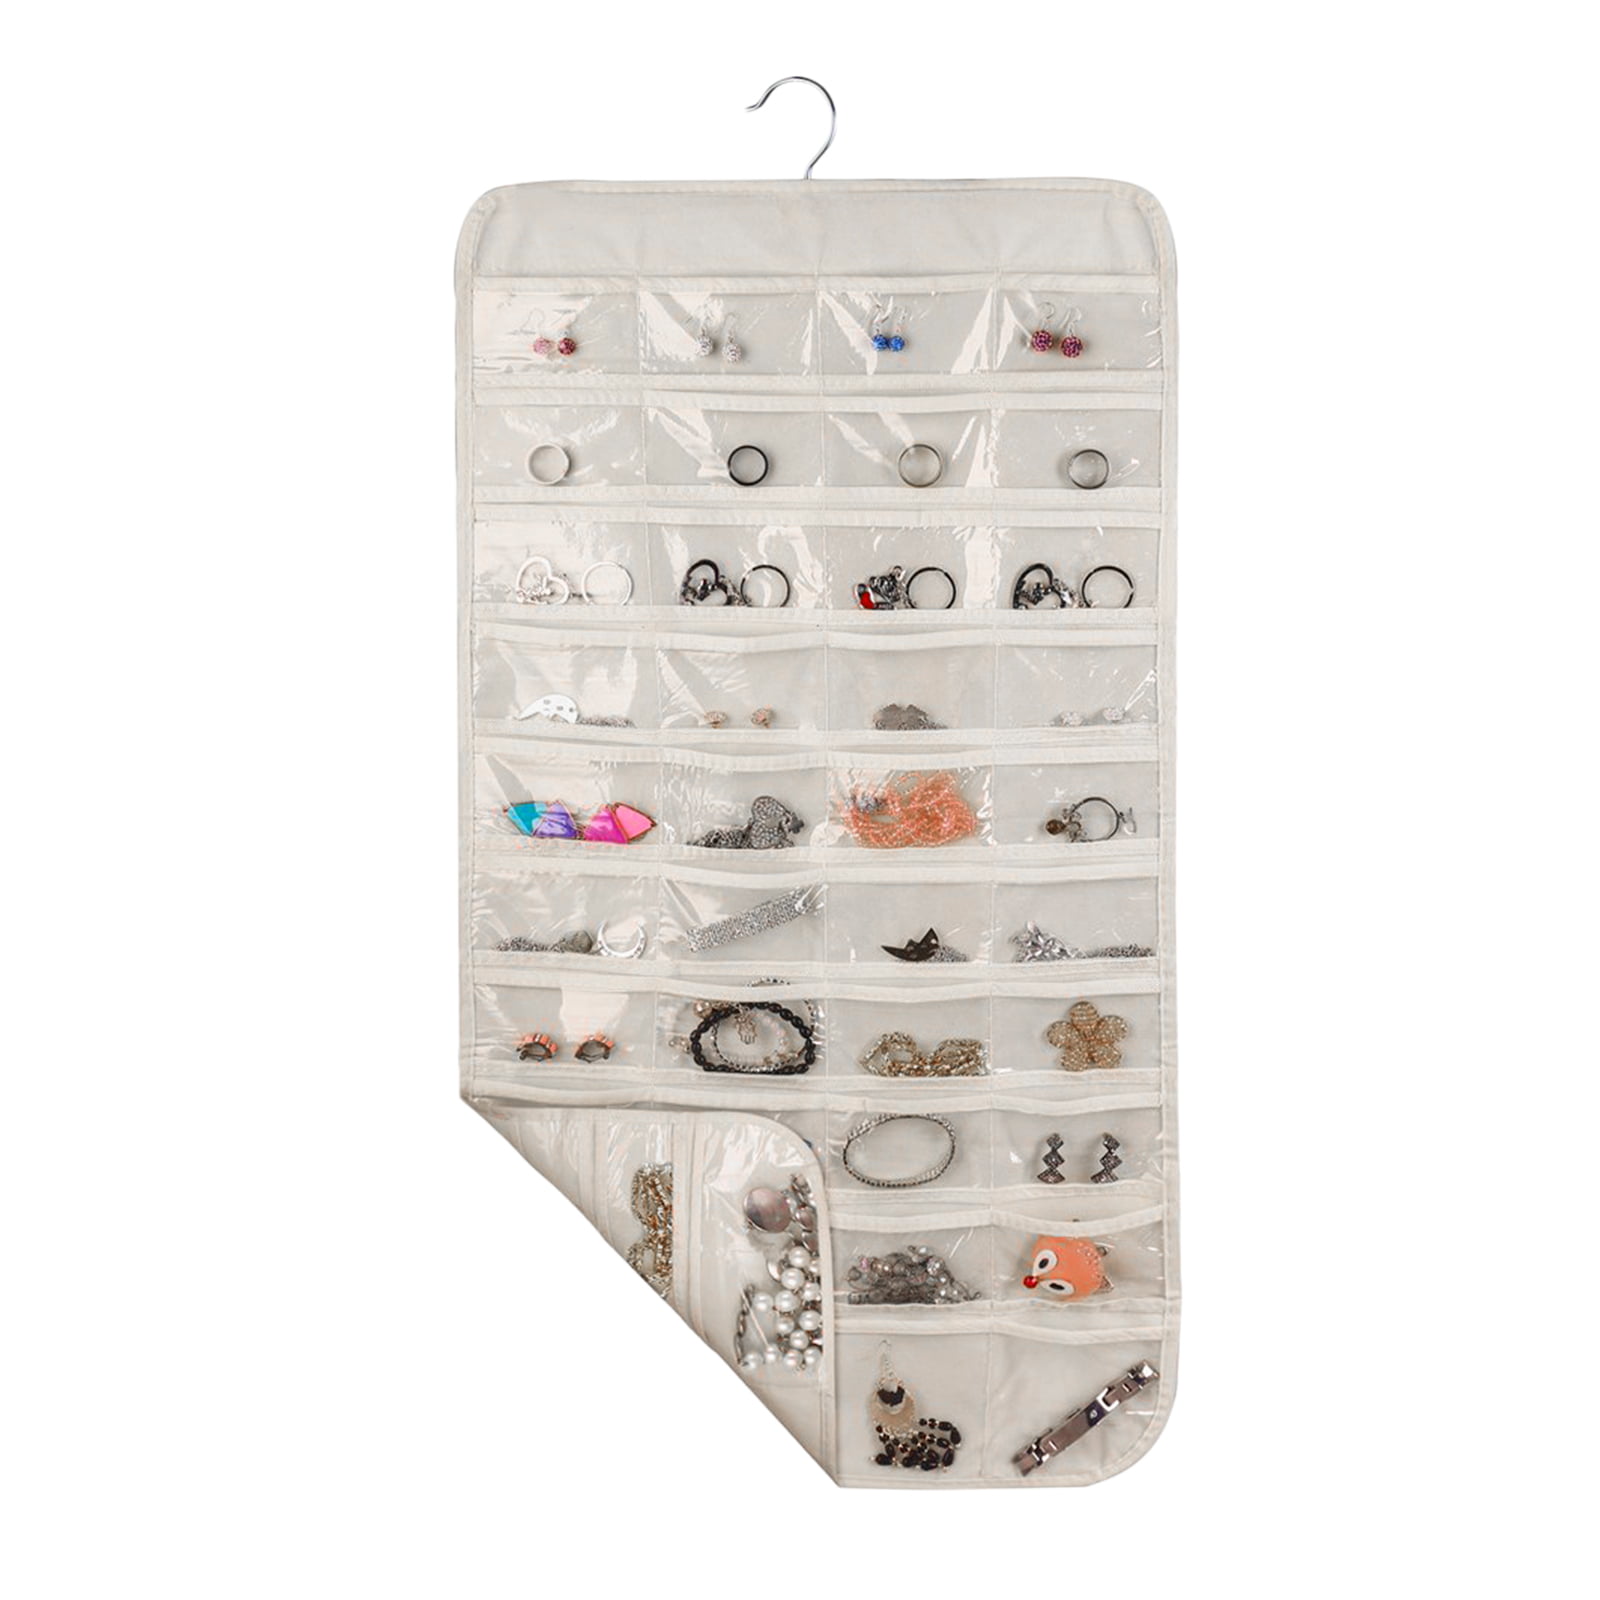 80 Pockets Jewelry Hanging Organizer Earring Necklace Jewelry Display Holder 